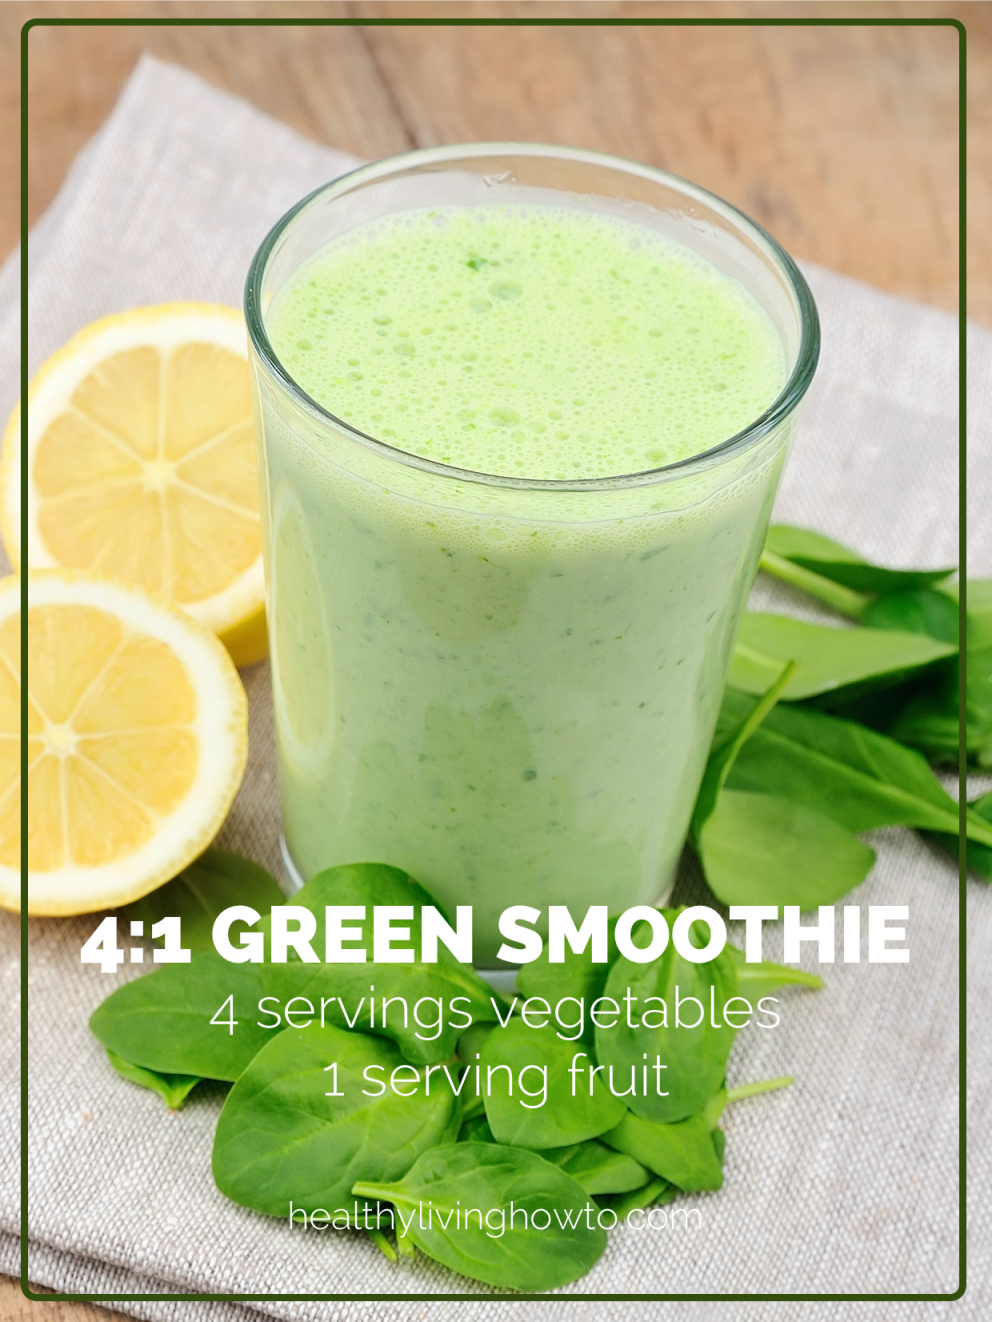 4:1 Green Smoothie - Healthy Living How To